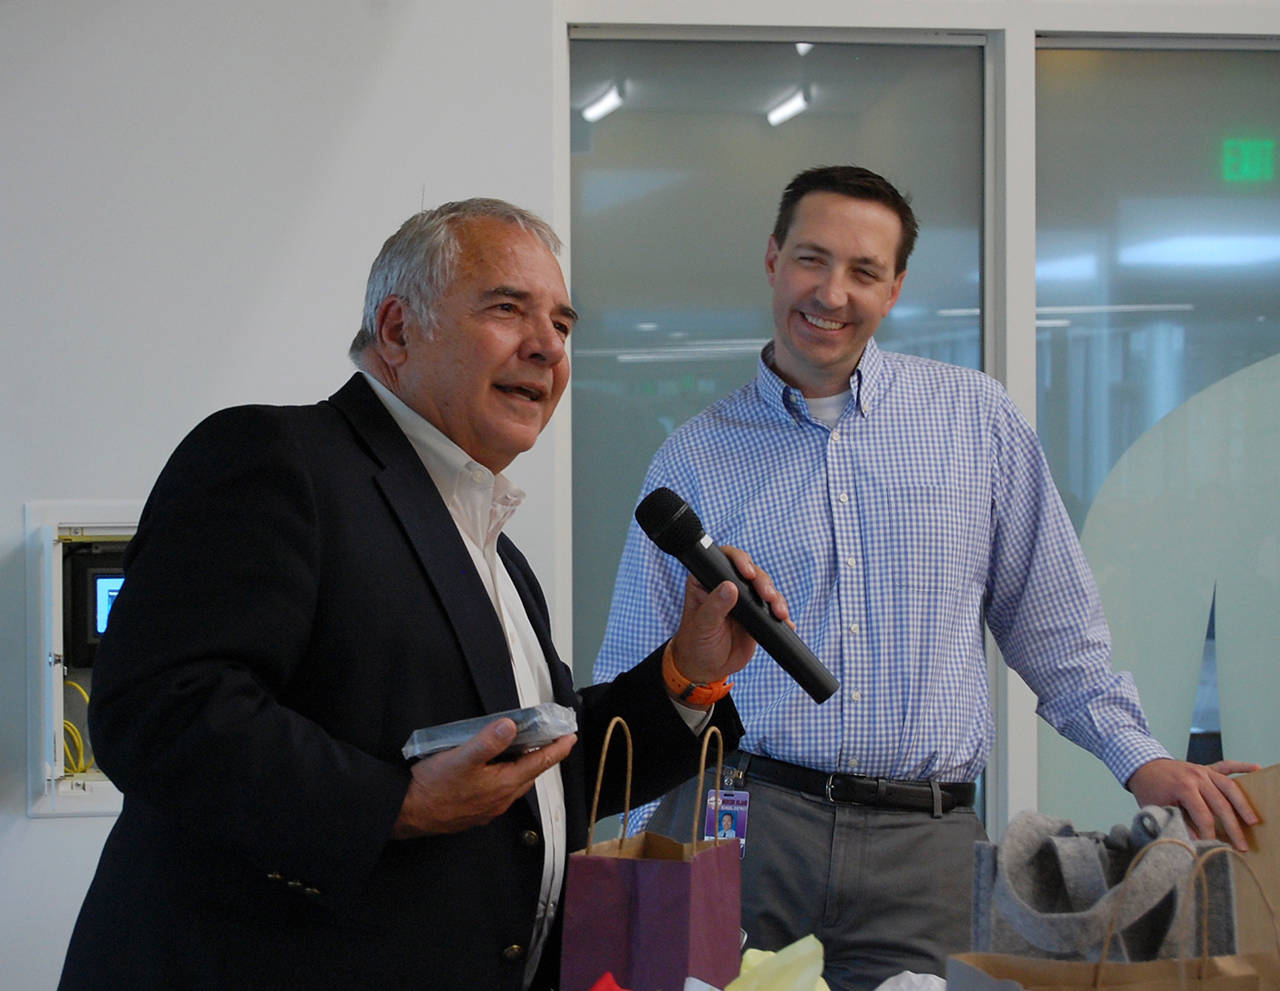 Mercer Island School District Superintendent Dr. Gary Plano speaks at his retirement celebration on June 15, after opening gifts from his colleagues. Plano has served as superintendent for 10 years, and will retire on June 30. Katie Metzger/staff photo